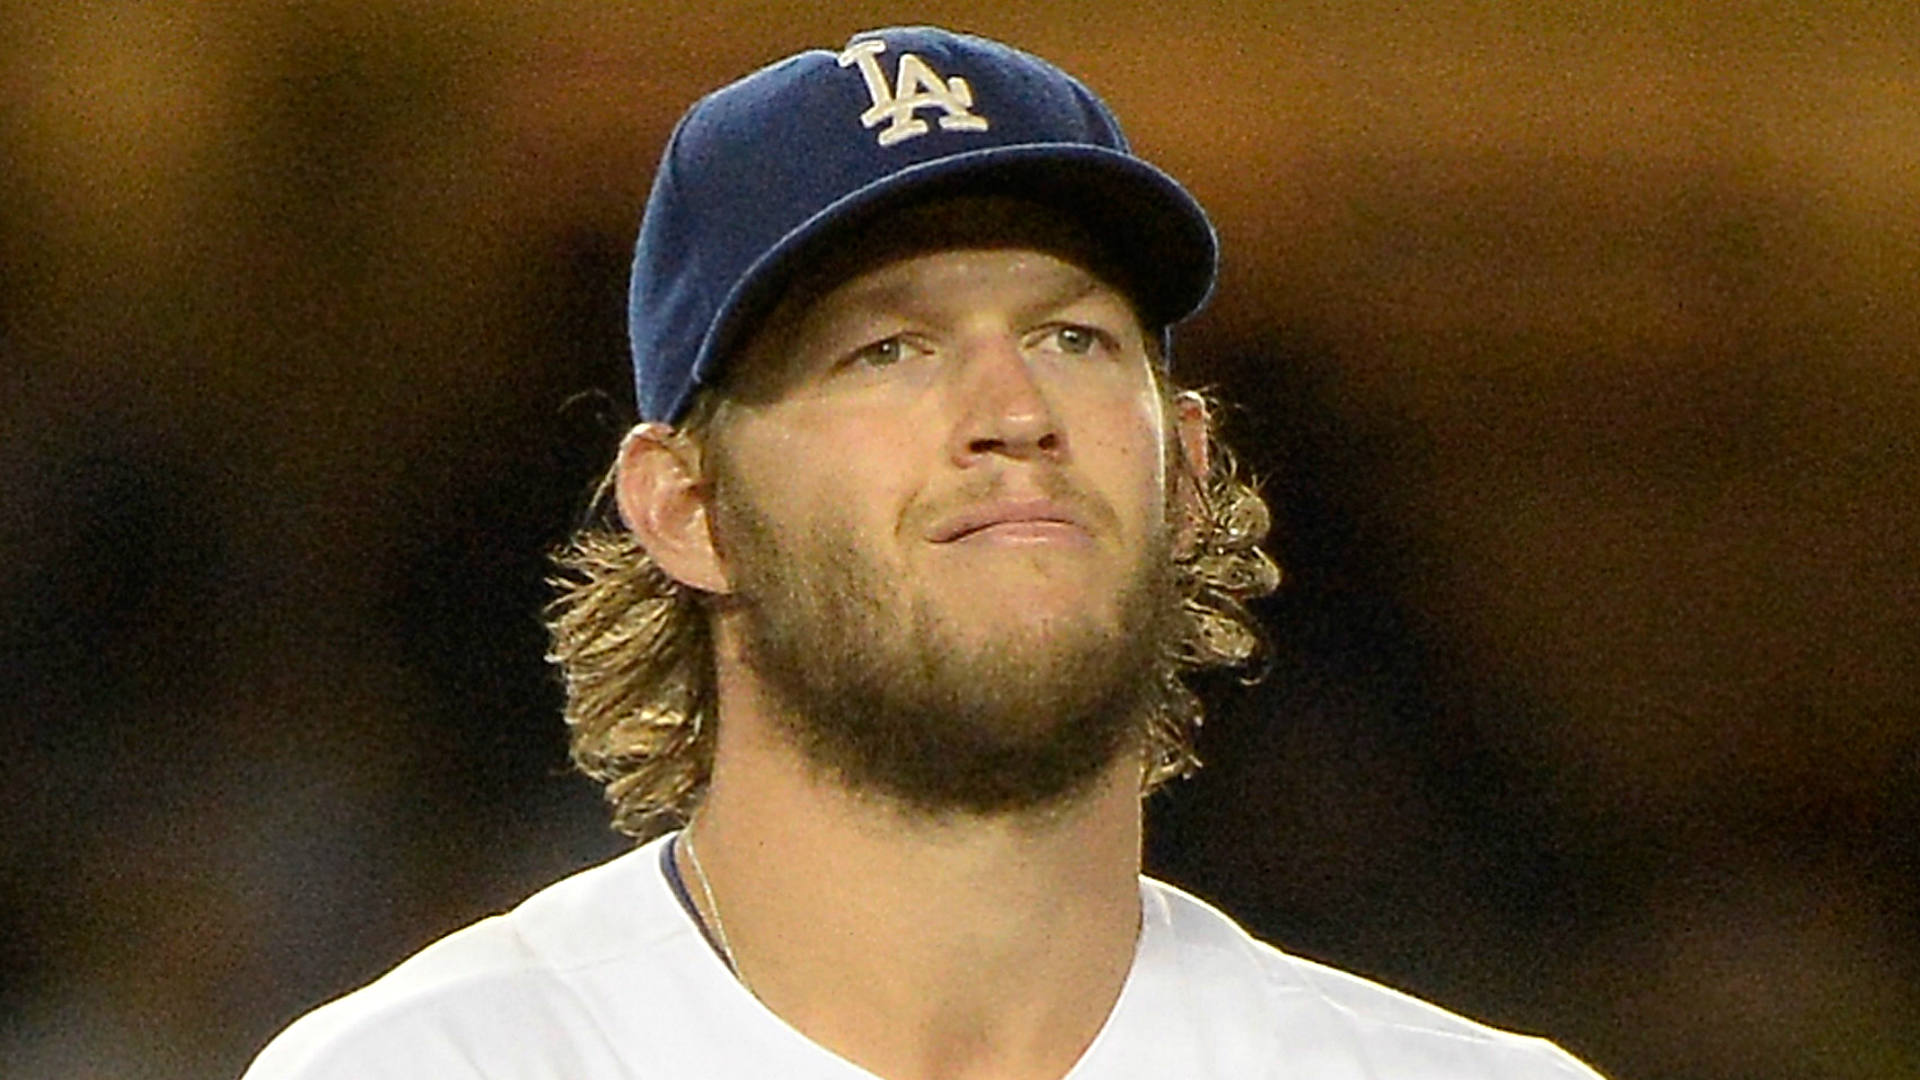 Clayton Kershaw wins NL Cy Young Award for third time | Sporting News Australia1920 x 1080